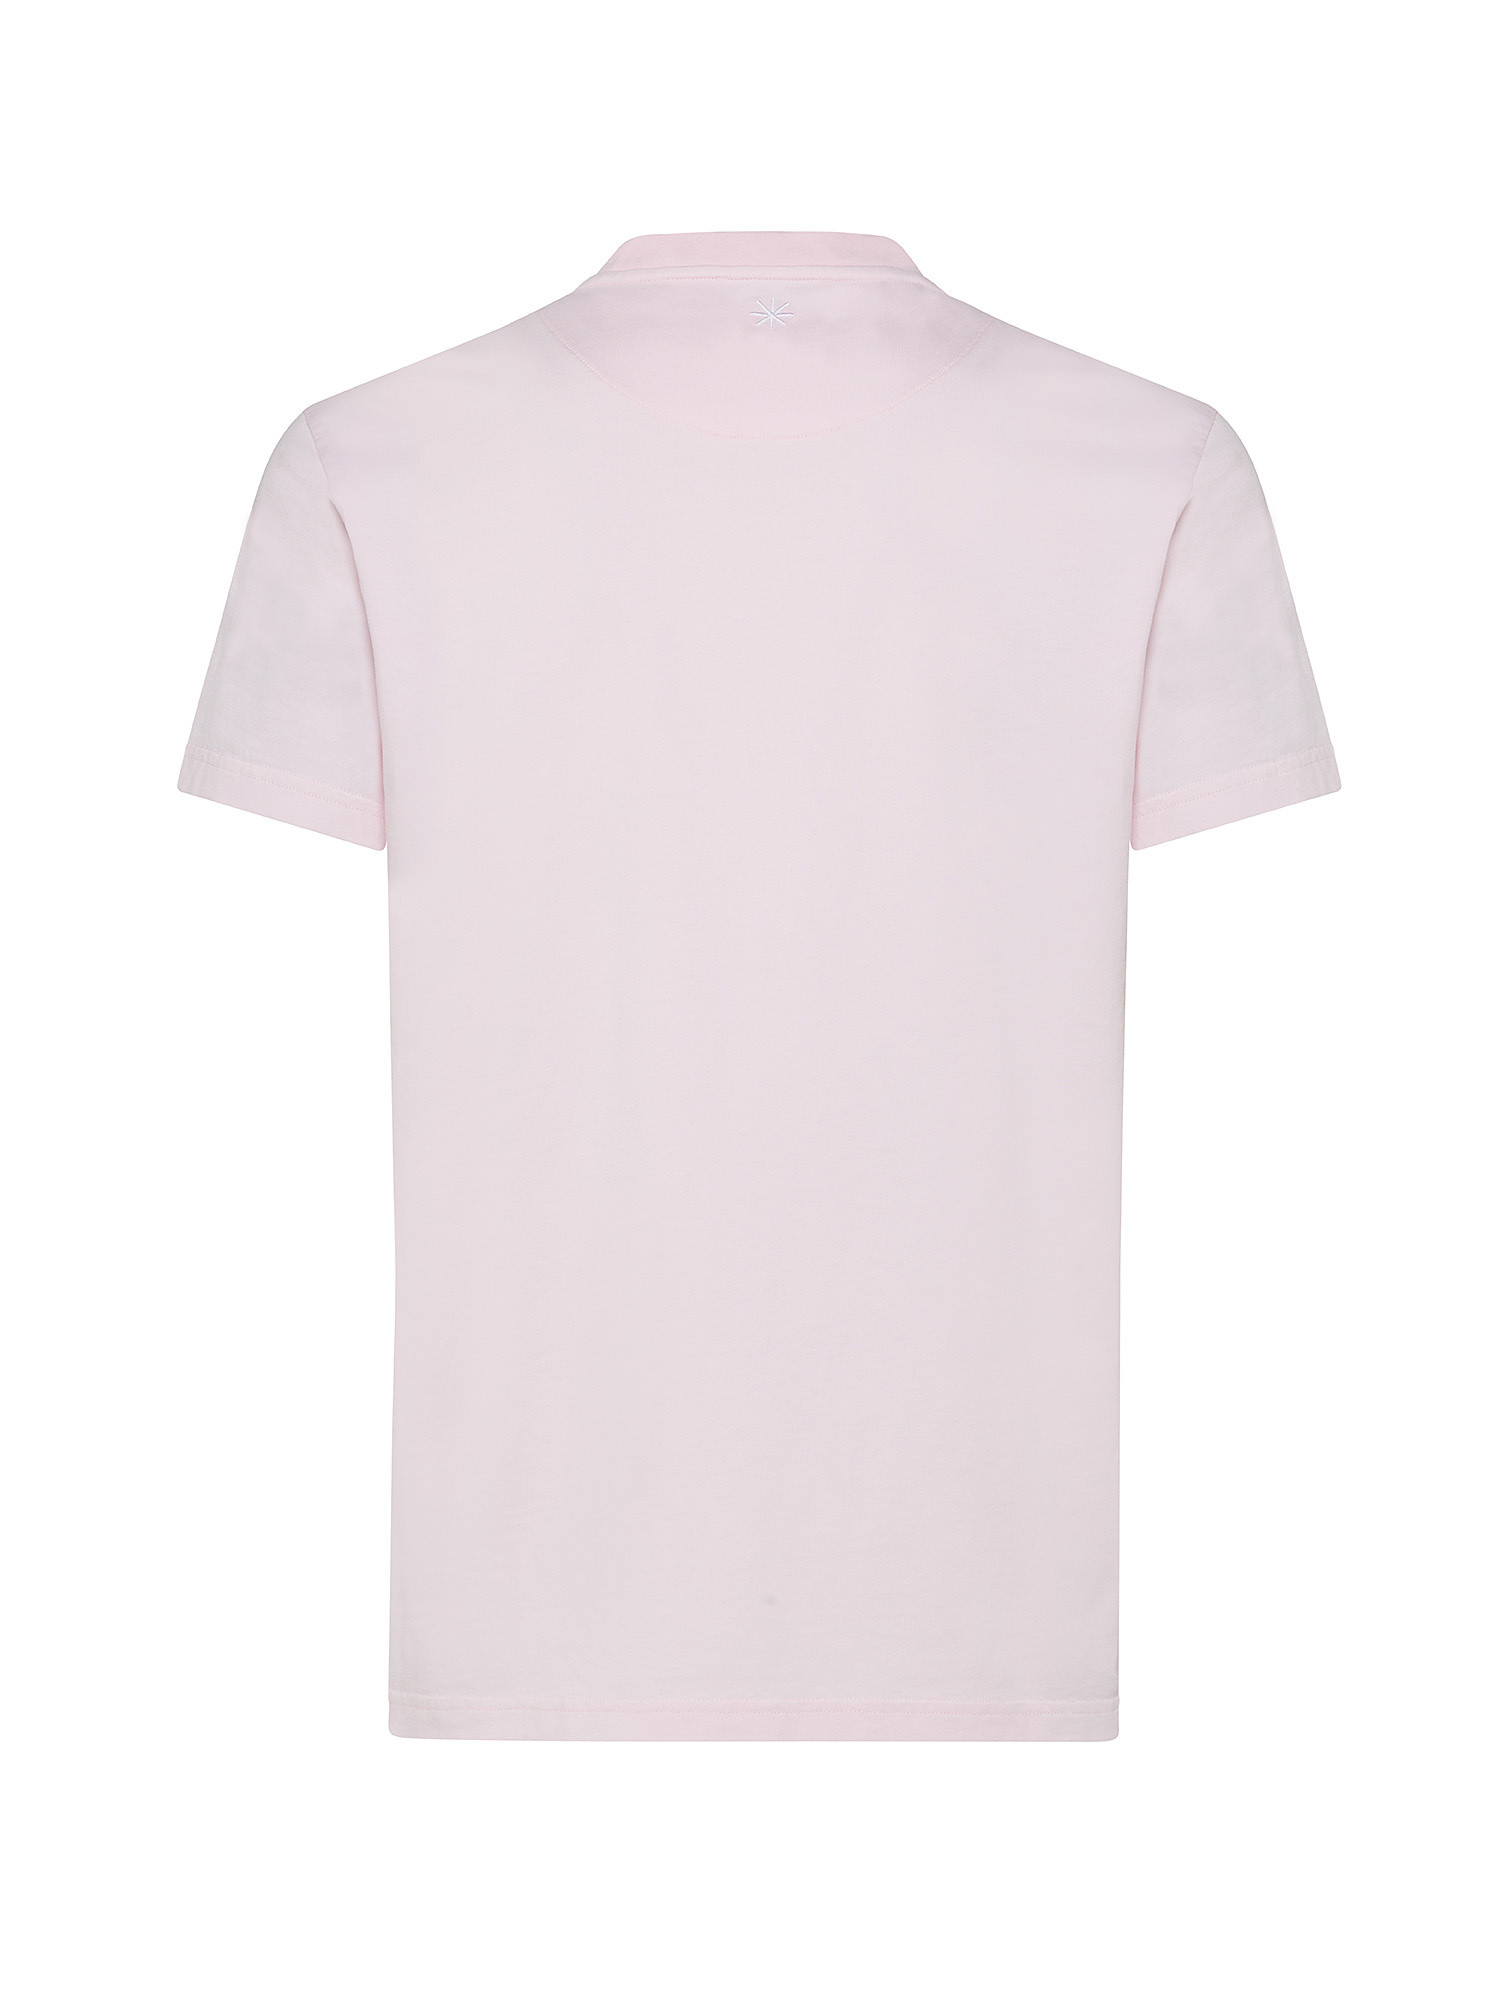 Manuel Ritz - T-shirt in cotone, Rosa, large image number 1